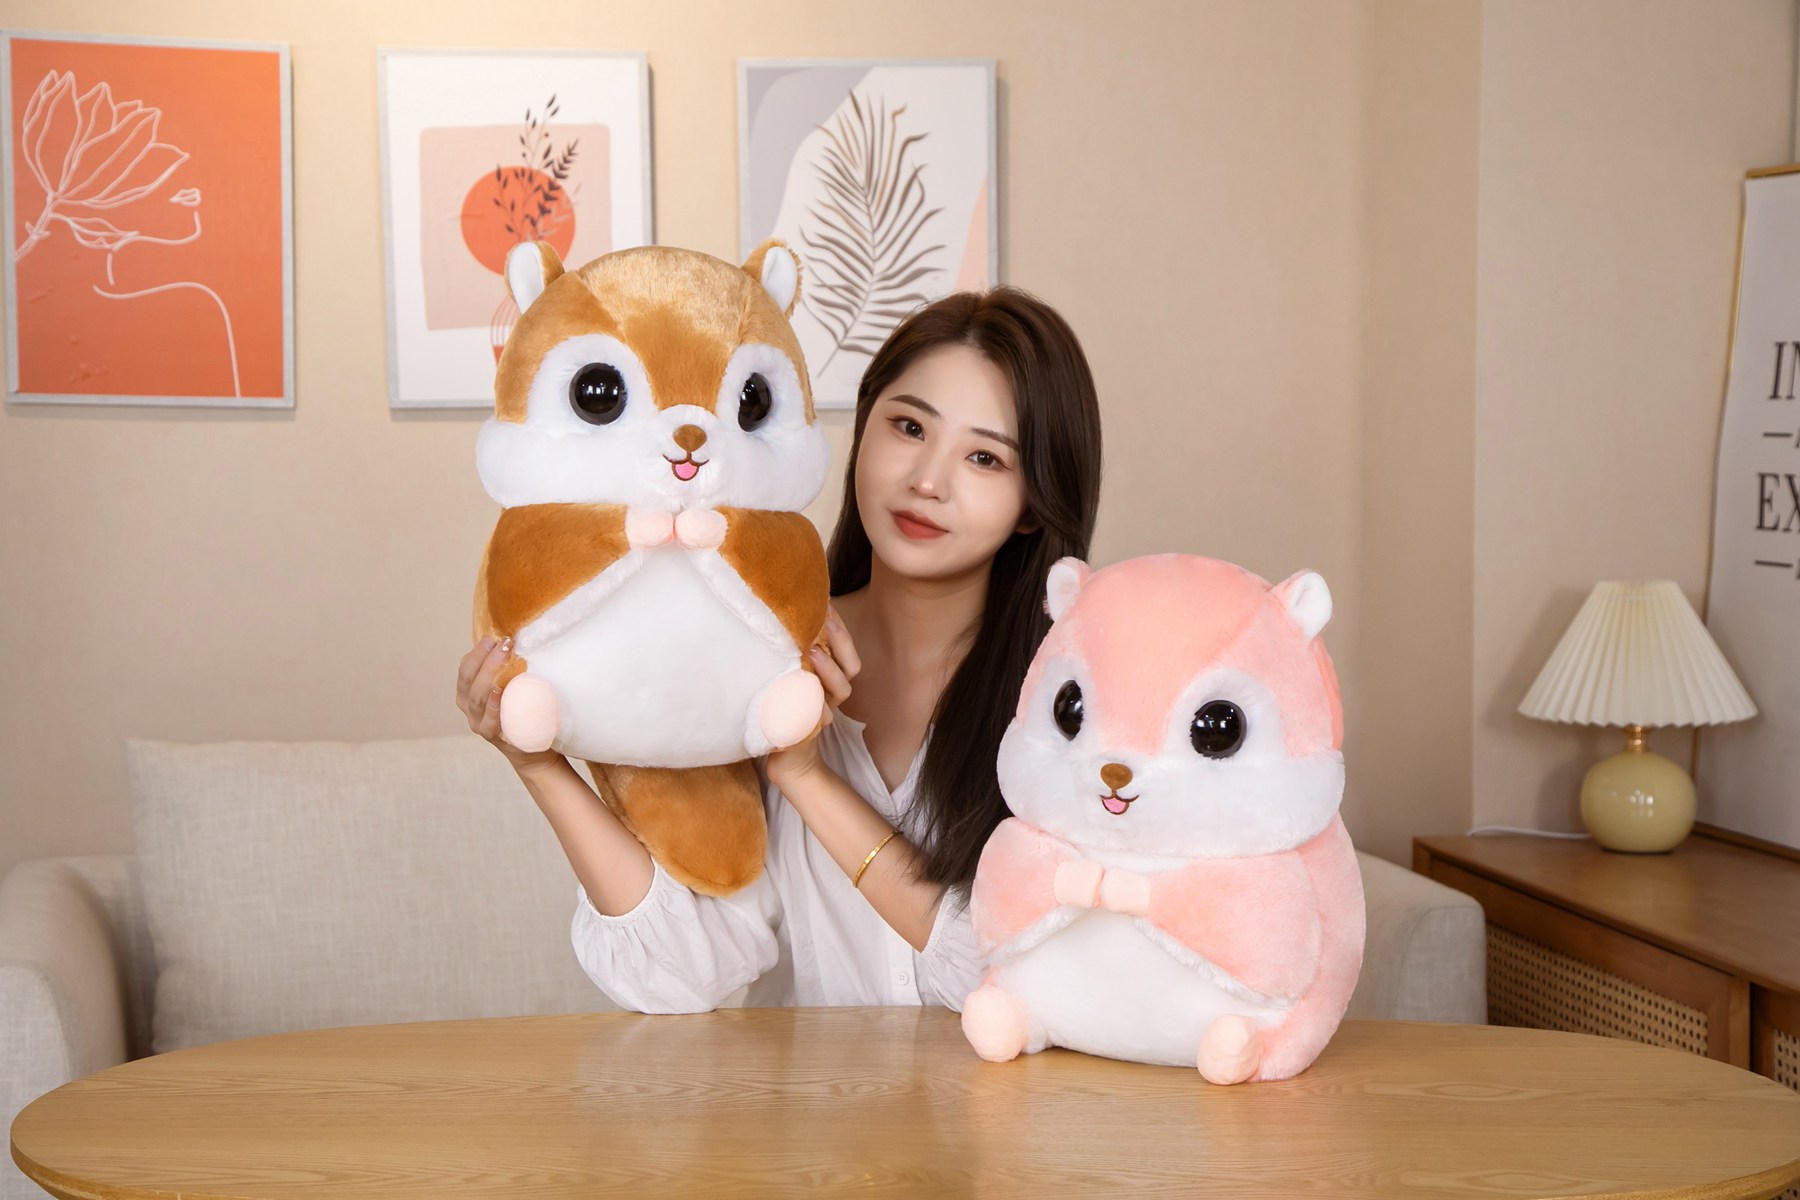 35cm Lovely Honey Glider Animal Doll with 22cm Tail Squirrel Stuffed Plush Toy Home Wedding Party Toys for Children Kids Gifts